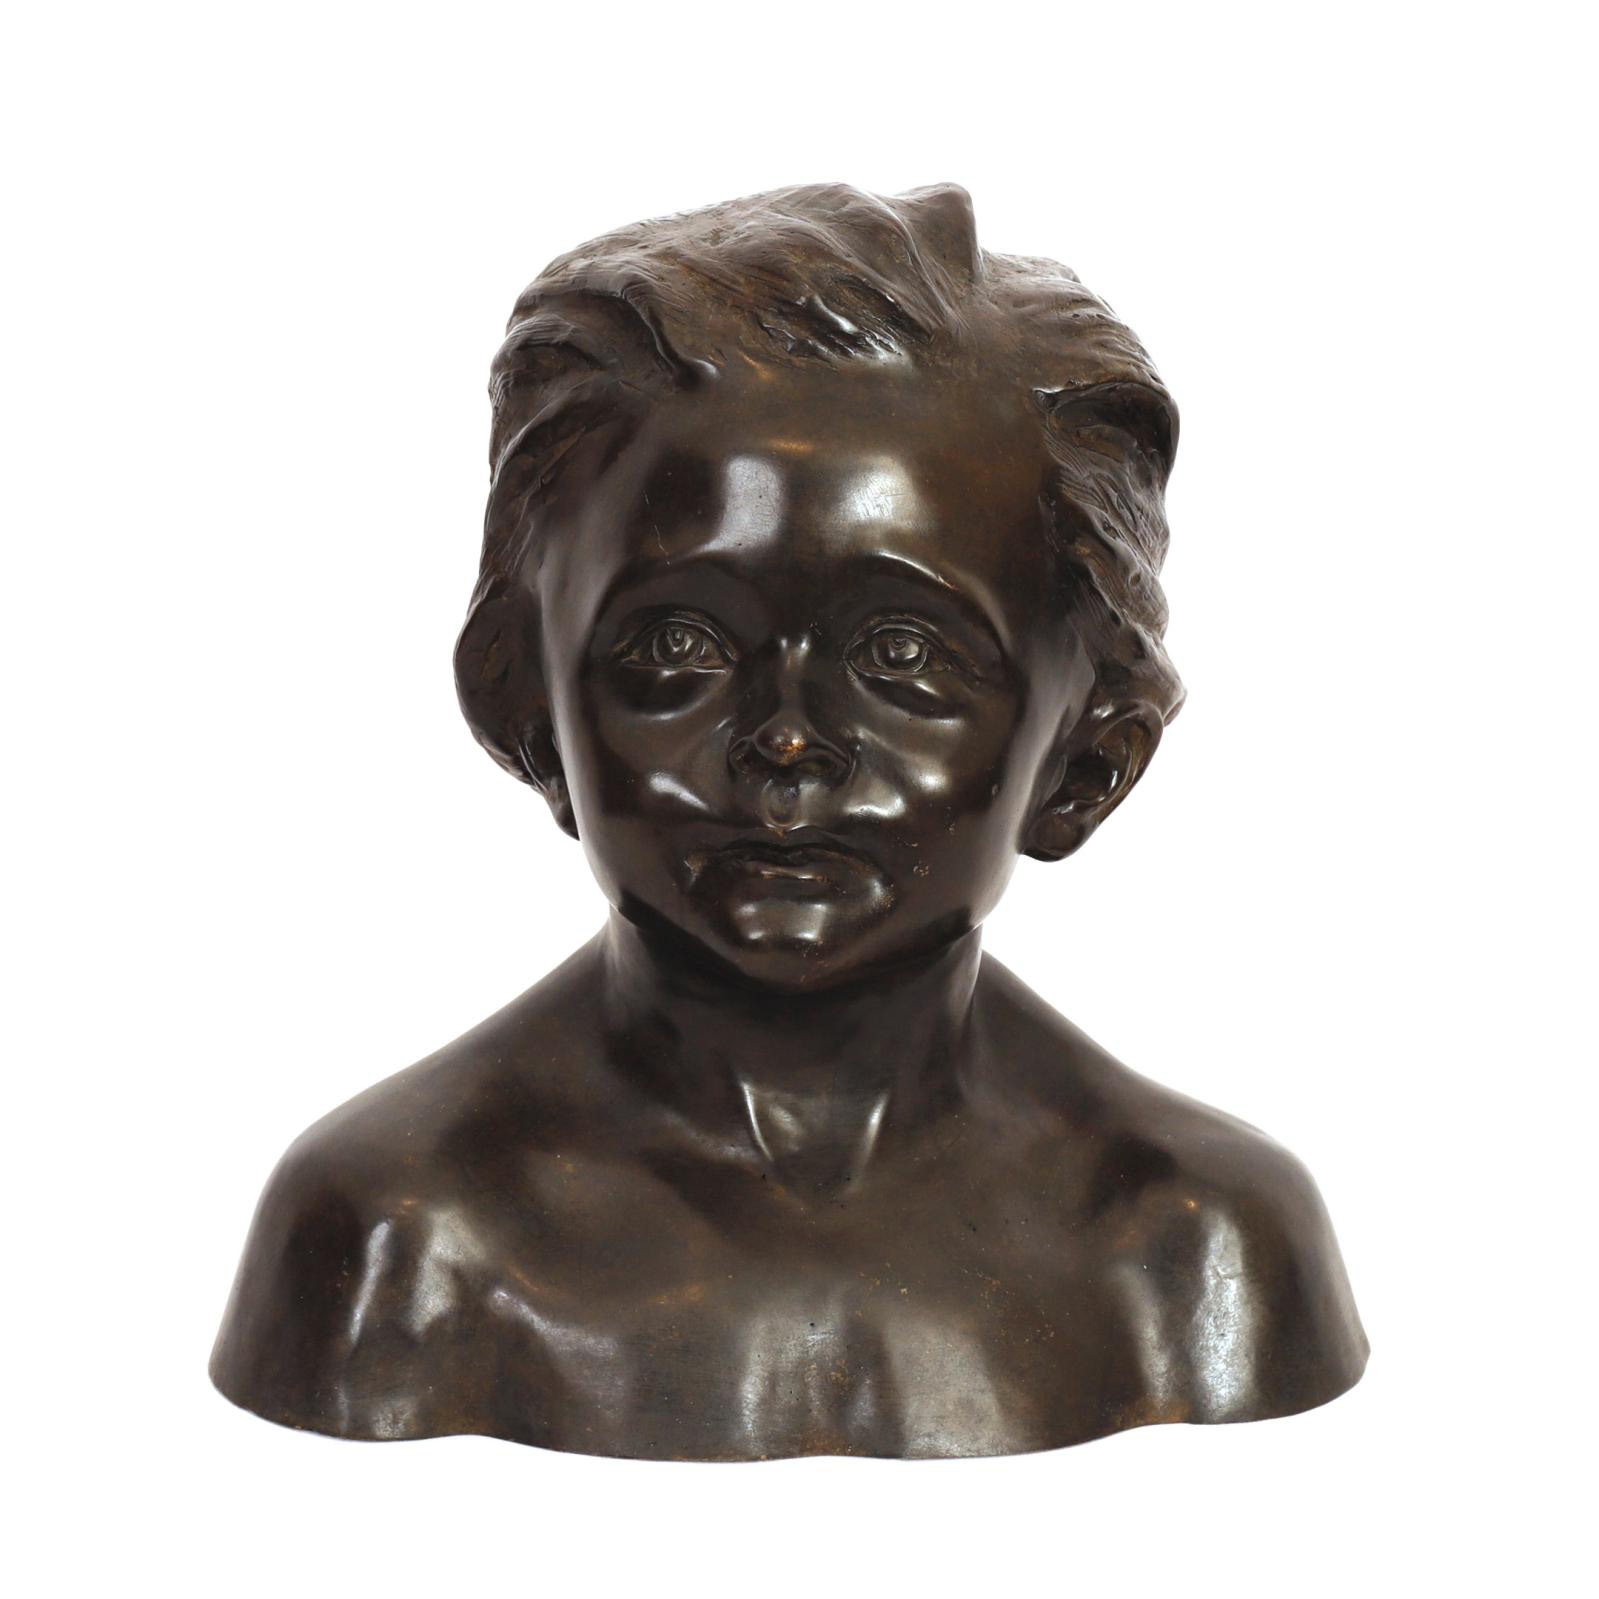 Camille Claudel (1864–1943) La Petite Châtelaine (The Little Chatelaine), posthumous bronze cast, curved braid version, nuanced brown patina, signed "C. Claudel" on the back, numbered "HC 2/4" and bearing the octagonal stamp of the founder Delval, 30.5 x 30.5 x 20.5 cm/12.00 x 12.00 x 8.07 in. Estimate: €35,000/40,000